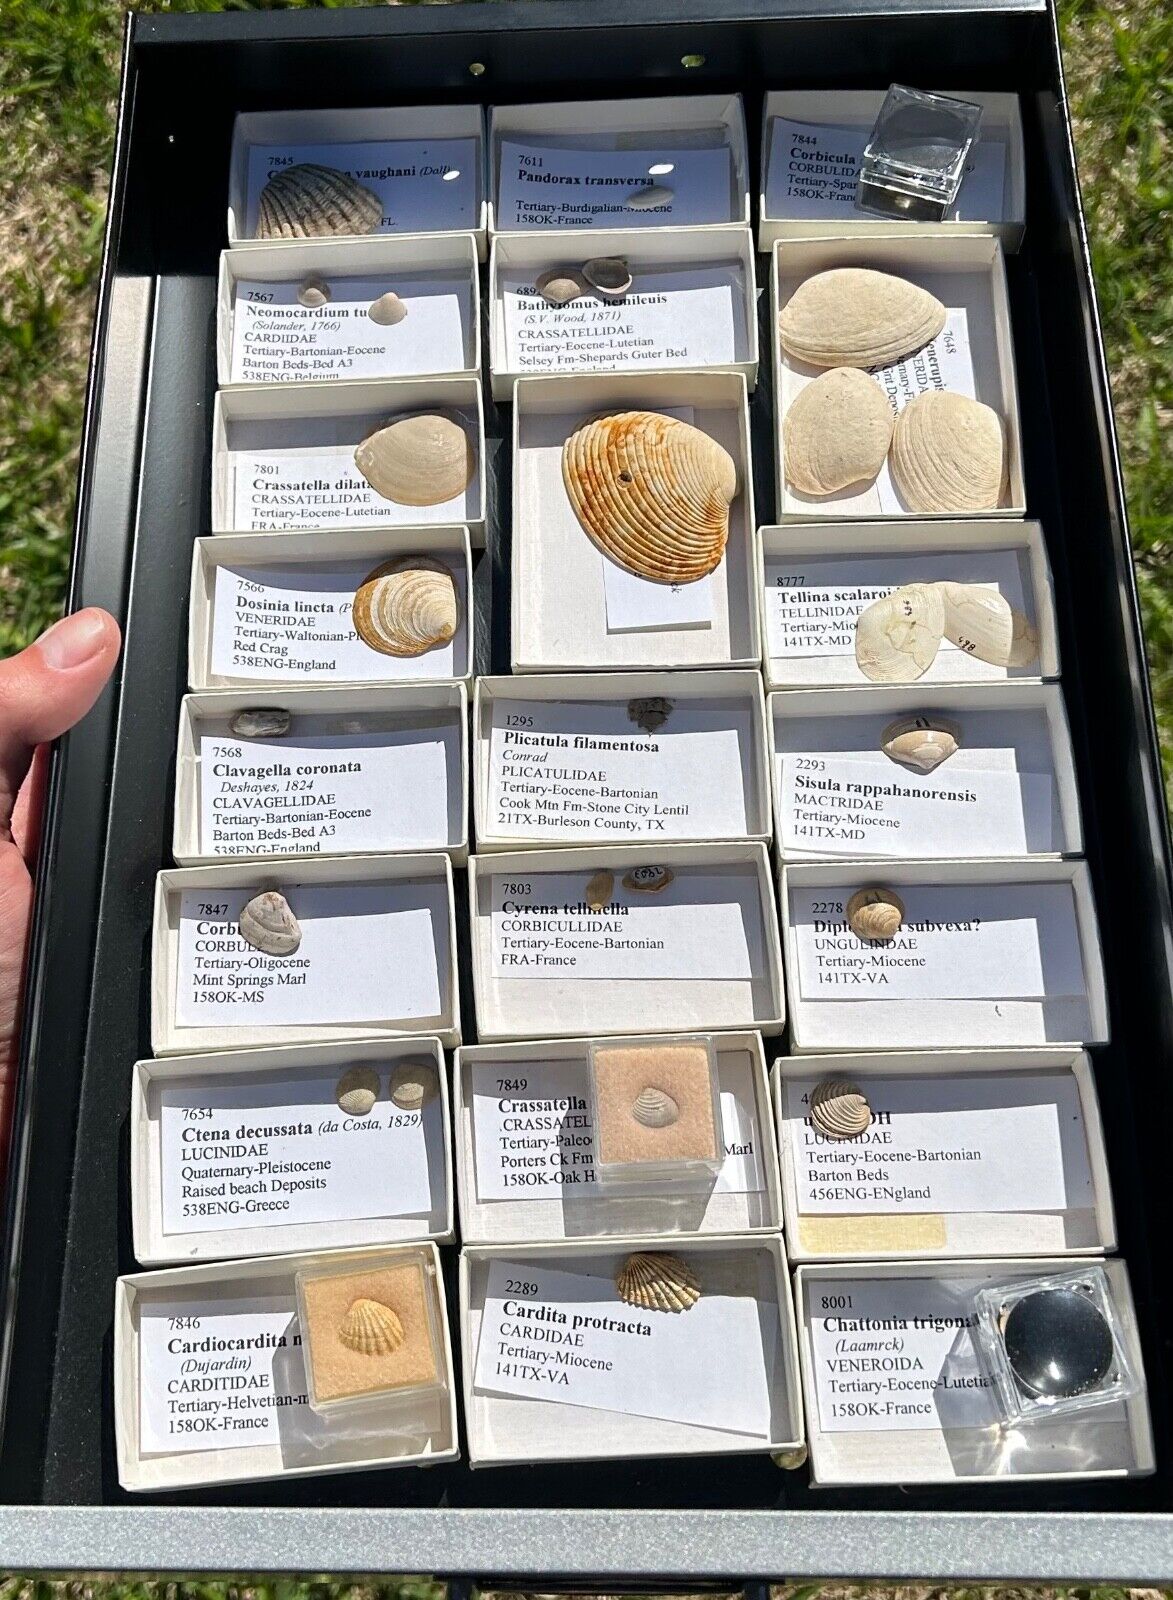 HUGE Fossil Bivalves Collection Labeled Many Species France England etc